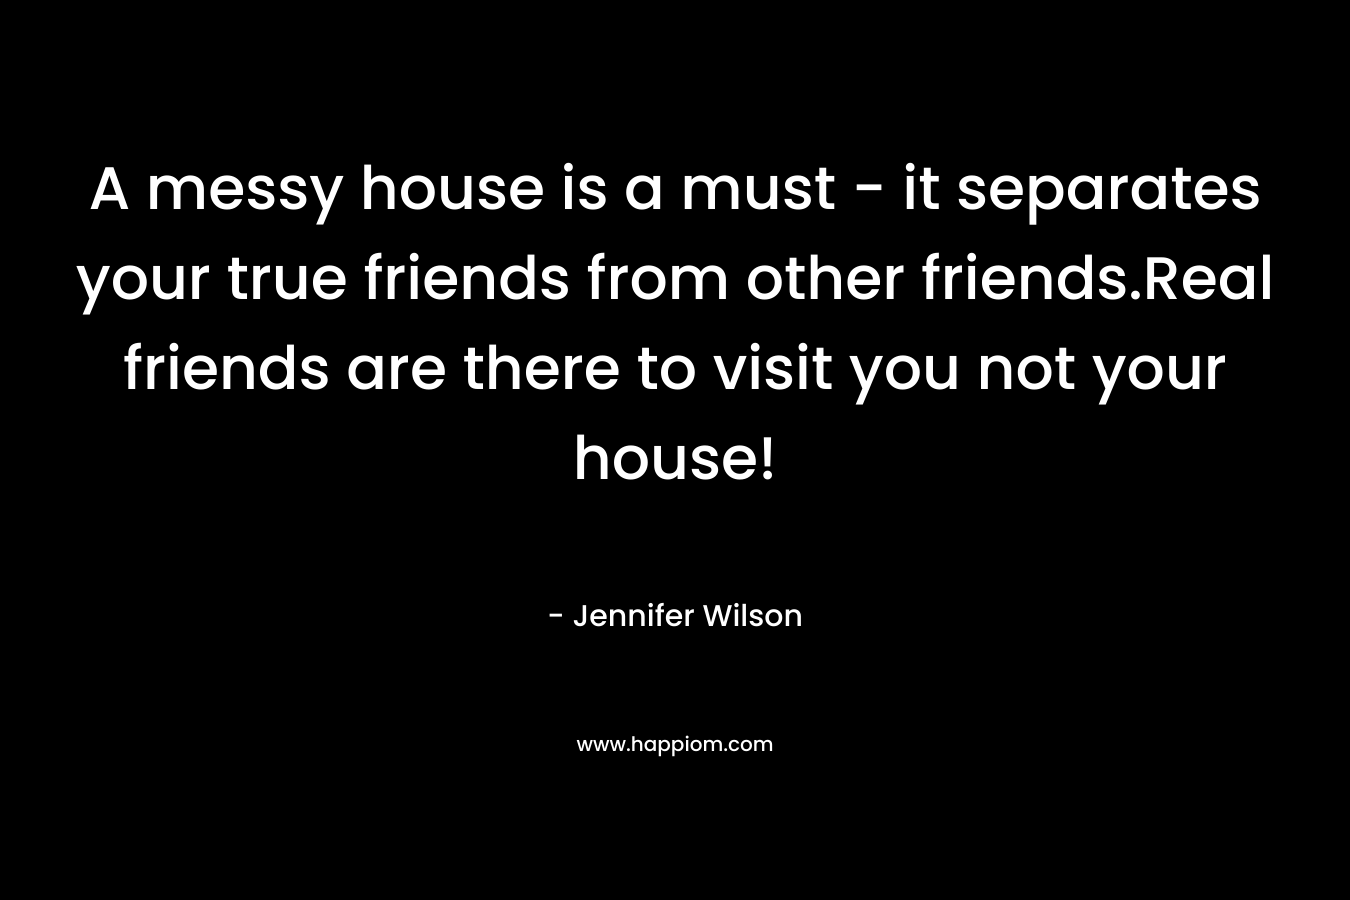 A messy house is a must - it separates your true friends from other friends.Real friends are there to visit you not your house!